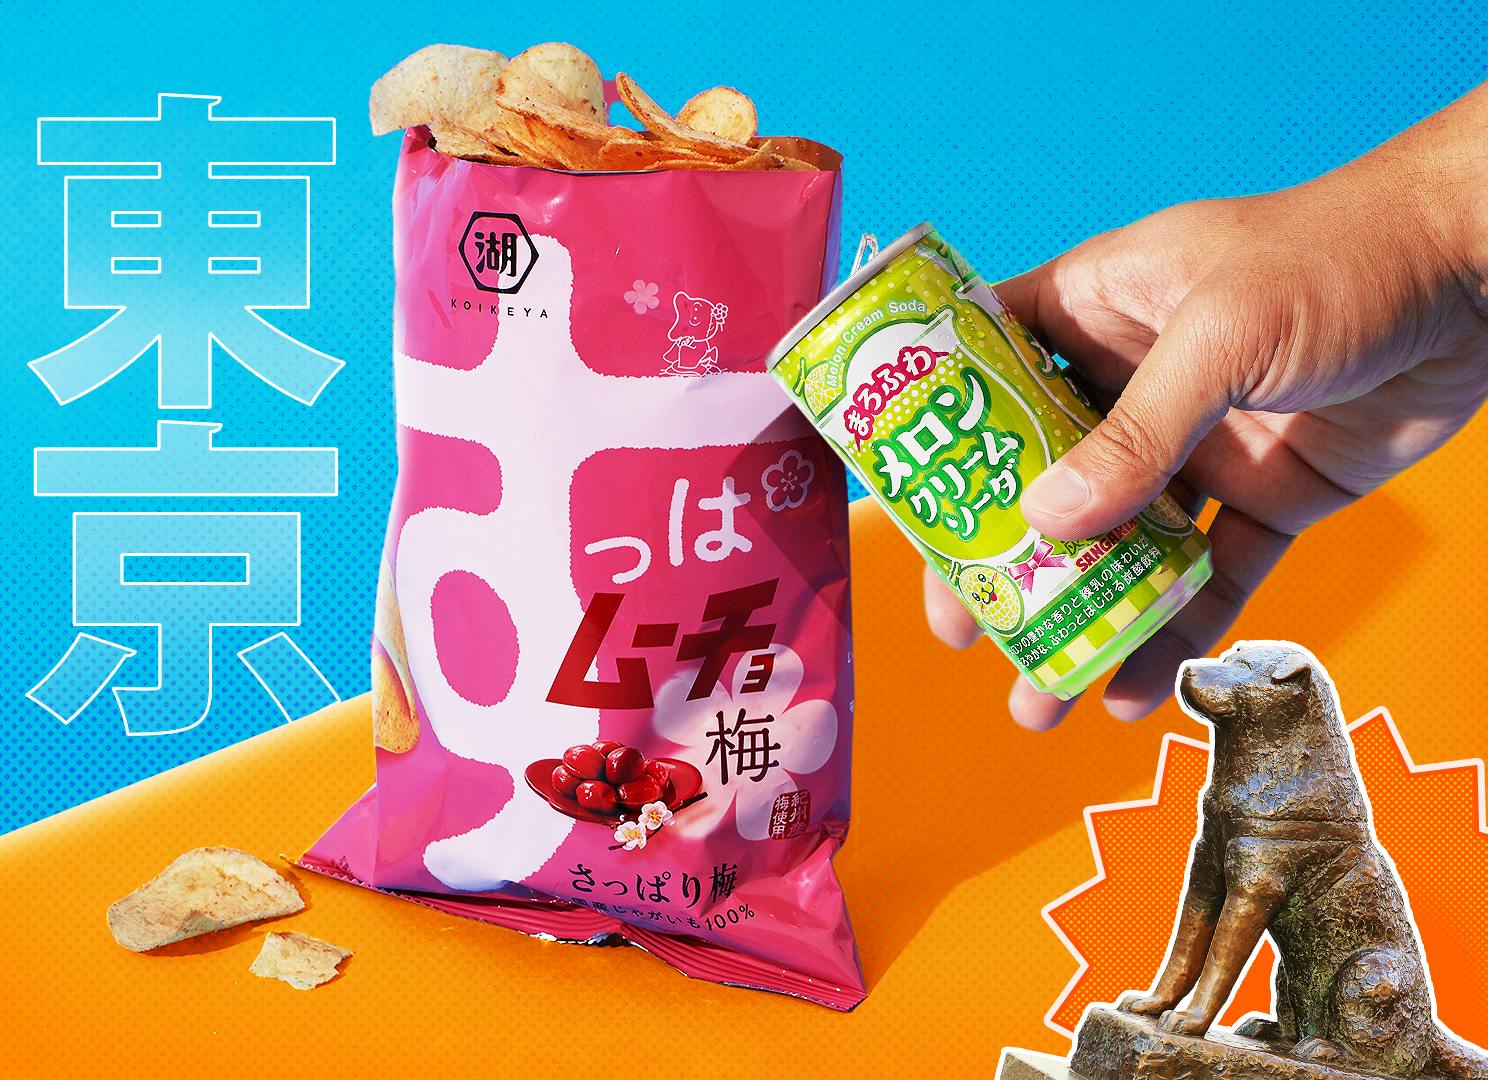 Koikeya Ume Chips and Melon Cream Soda sit against a bright orange and blue backdrop, with Hachiko showing next to it.